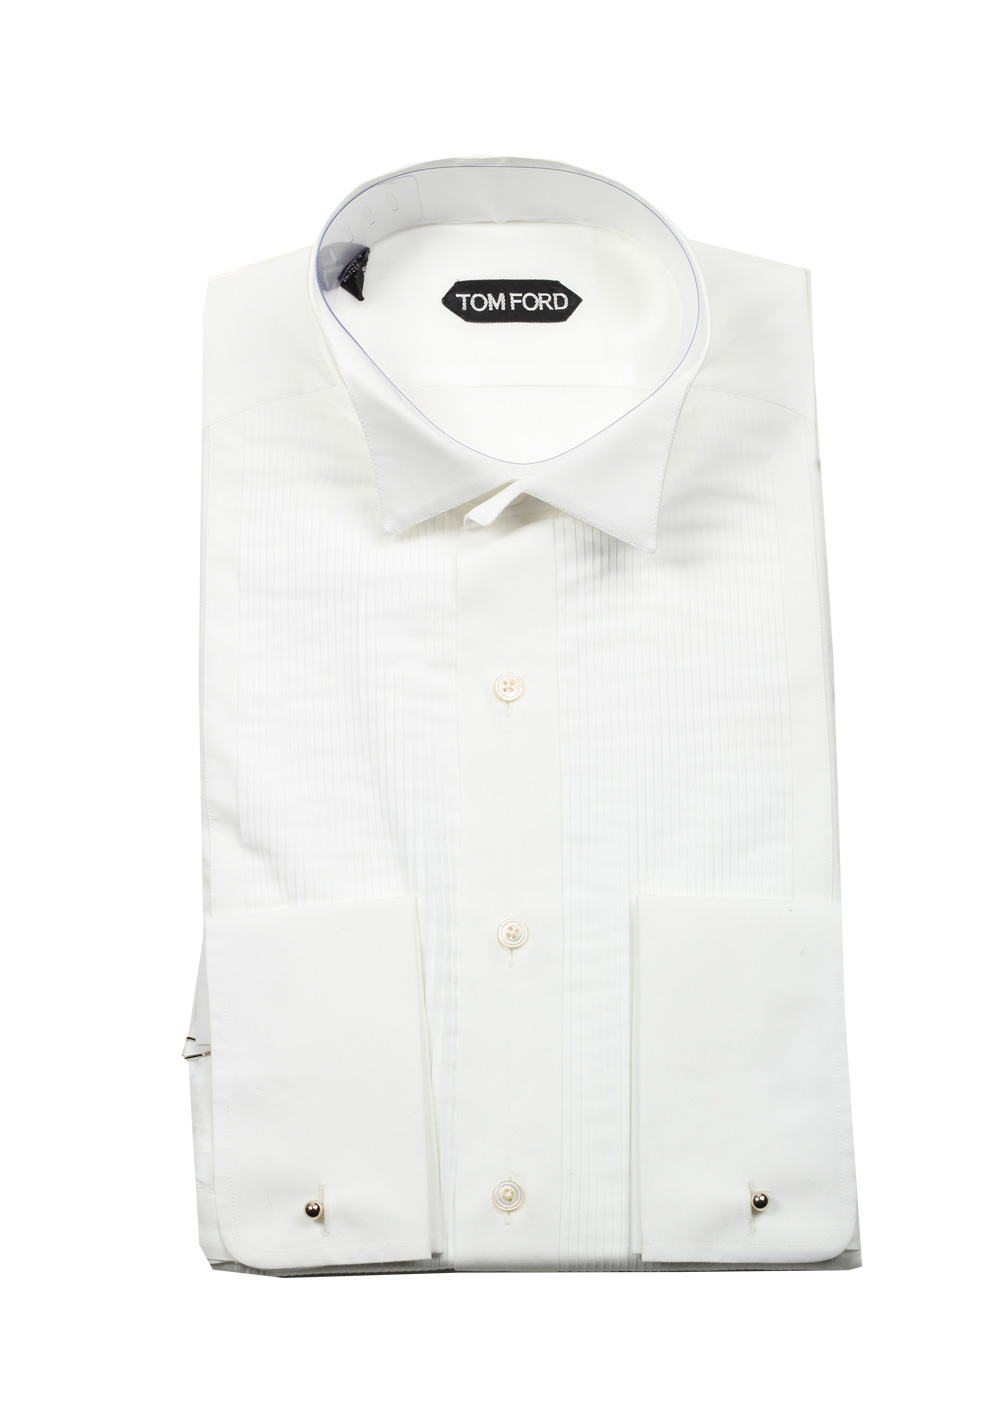 TOM FORD Solid White Tuxedo Shirt Size 39 / 15,5 . | Costume Limité